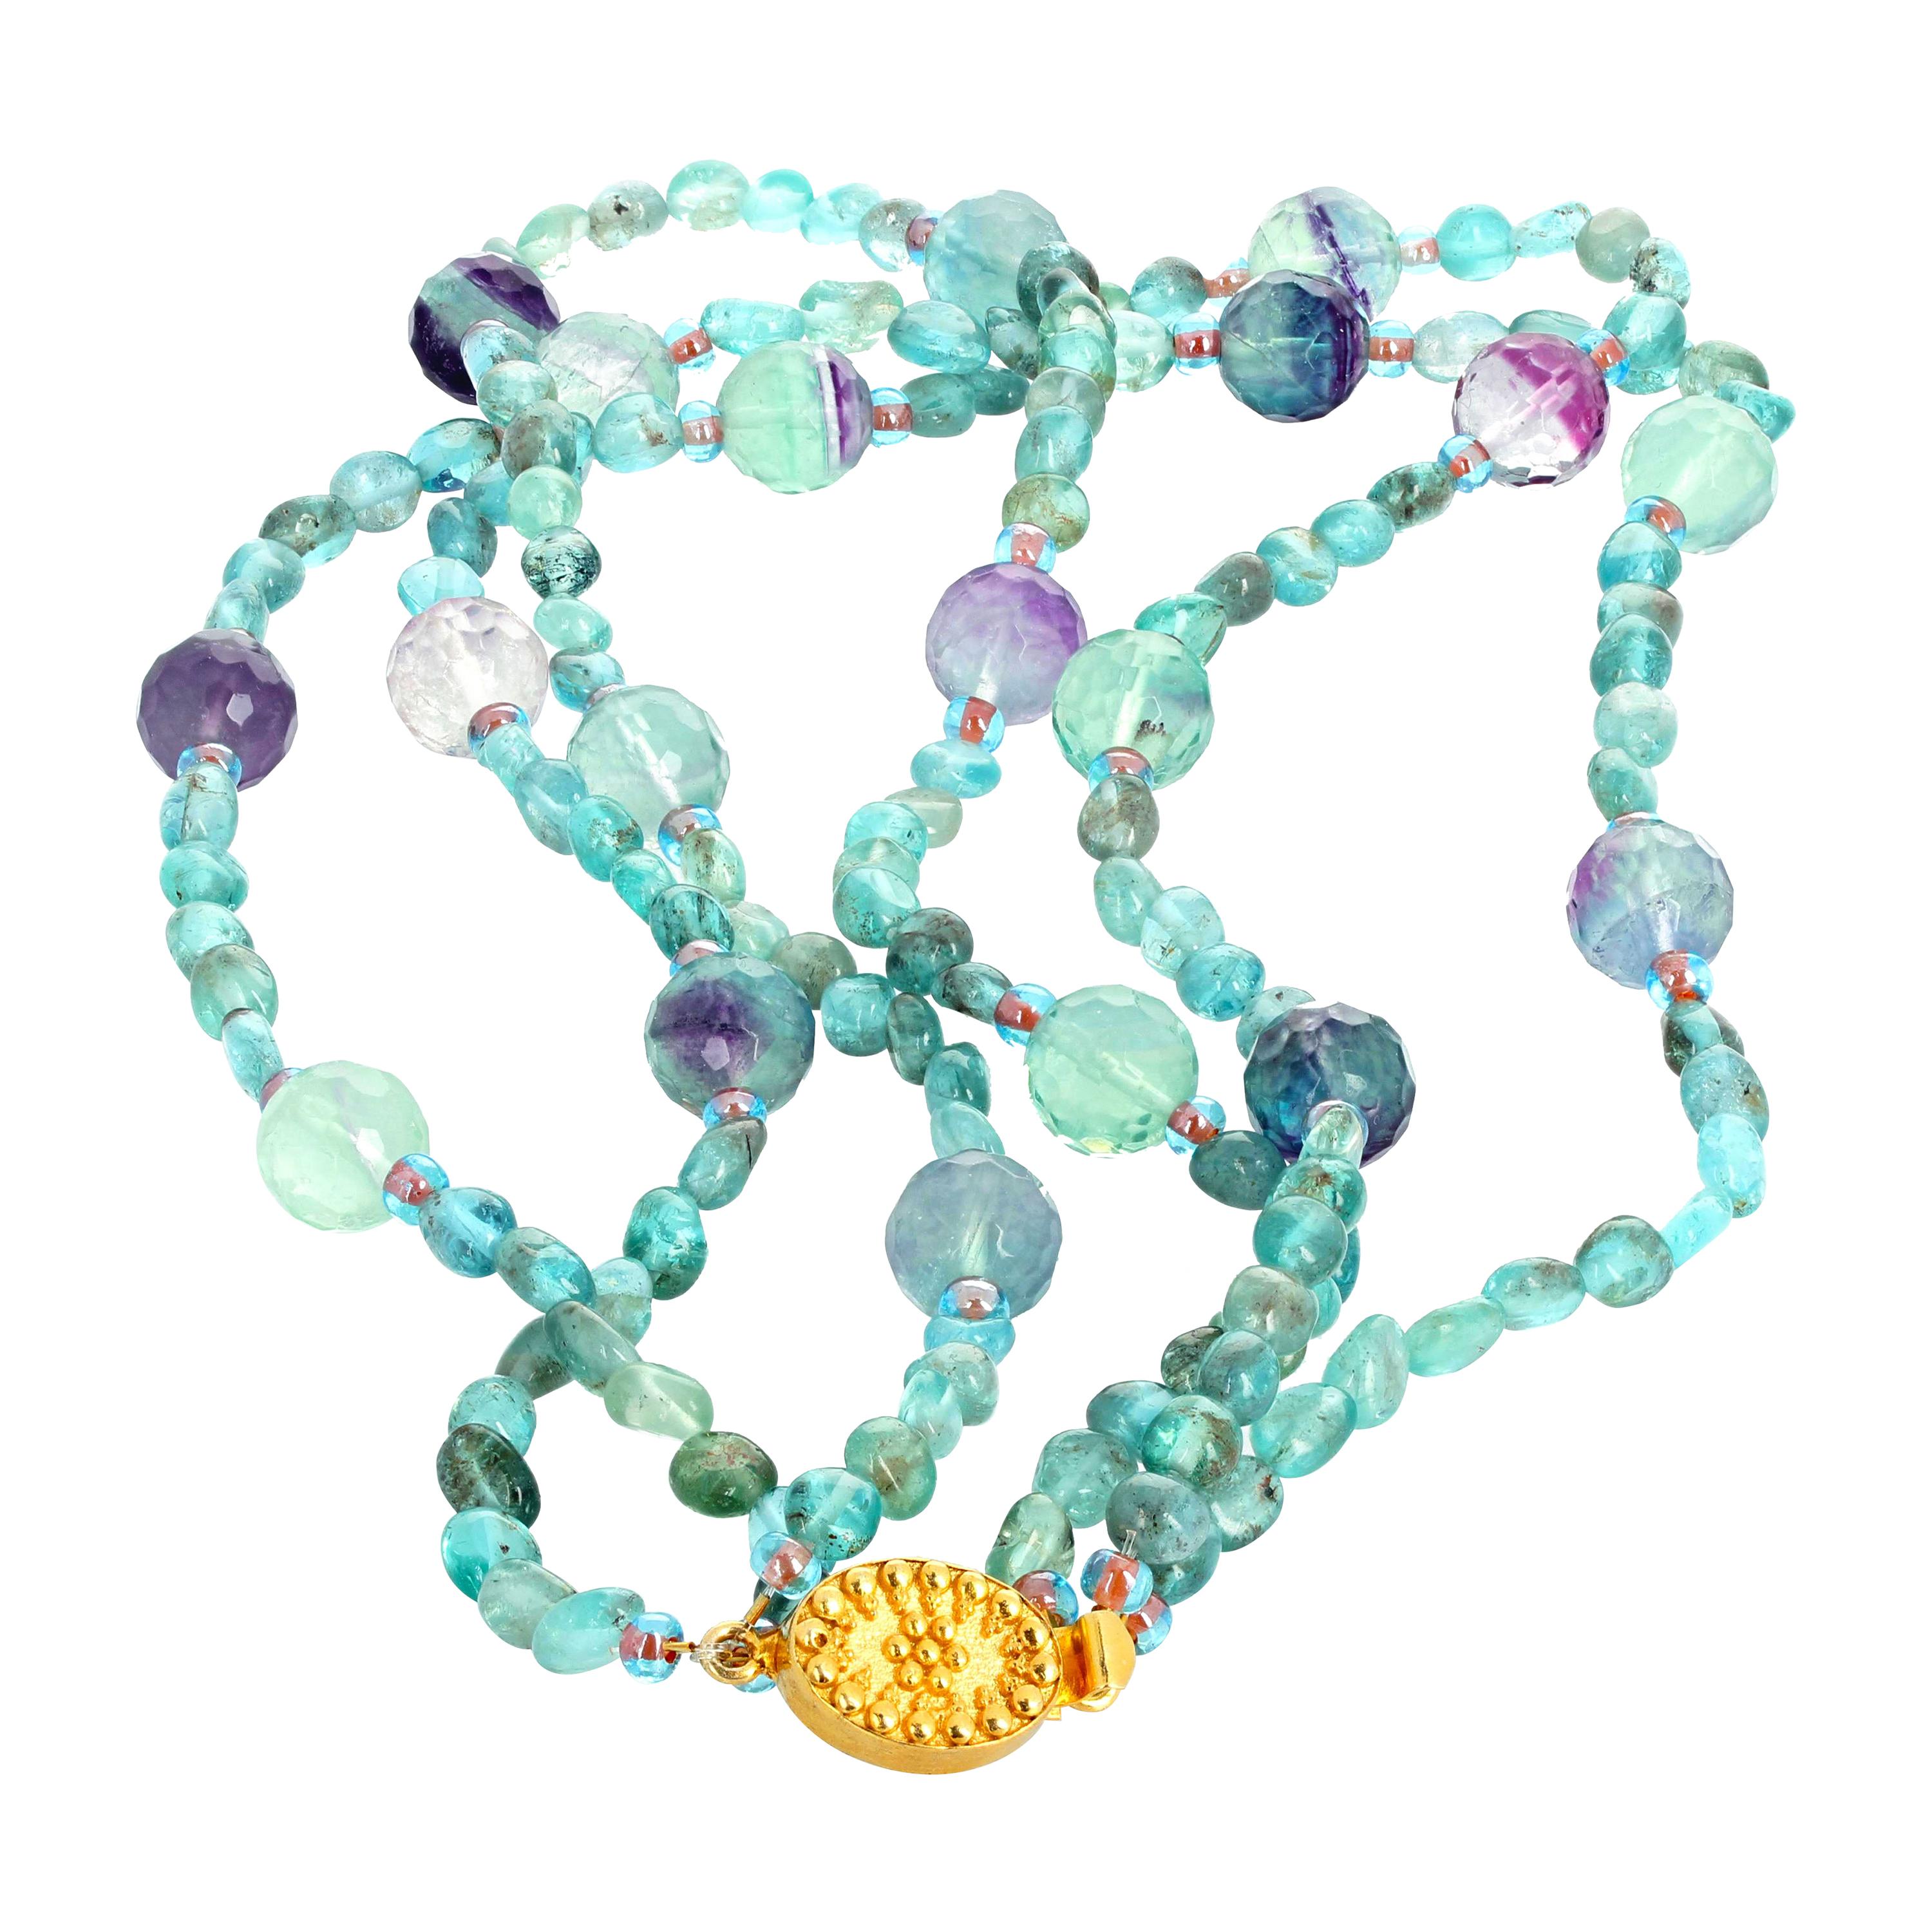 Gorgeous glowing brilliant bluegreen natural precious Apatite (approximately 6.5 mm) enhanced with checkerboard gem cut natural Fluorite rondels (approximately 12 mm) set in this triple strand twistable necklace with gold plated easy to use clasp.